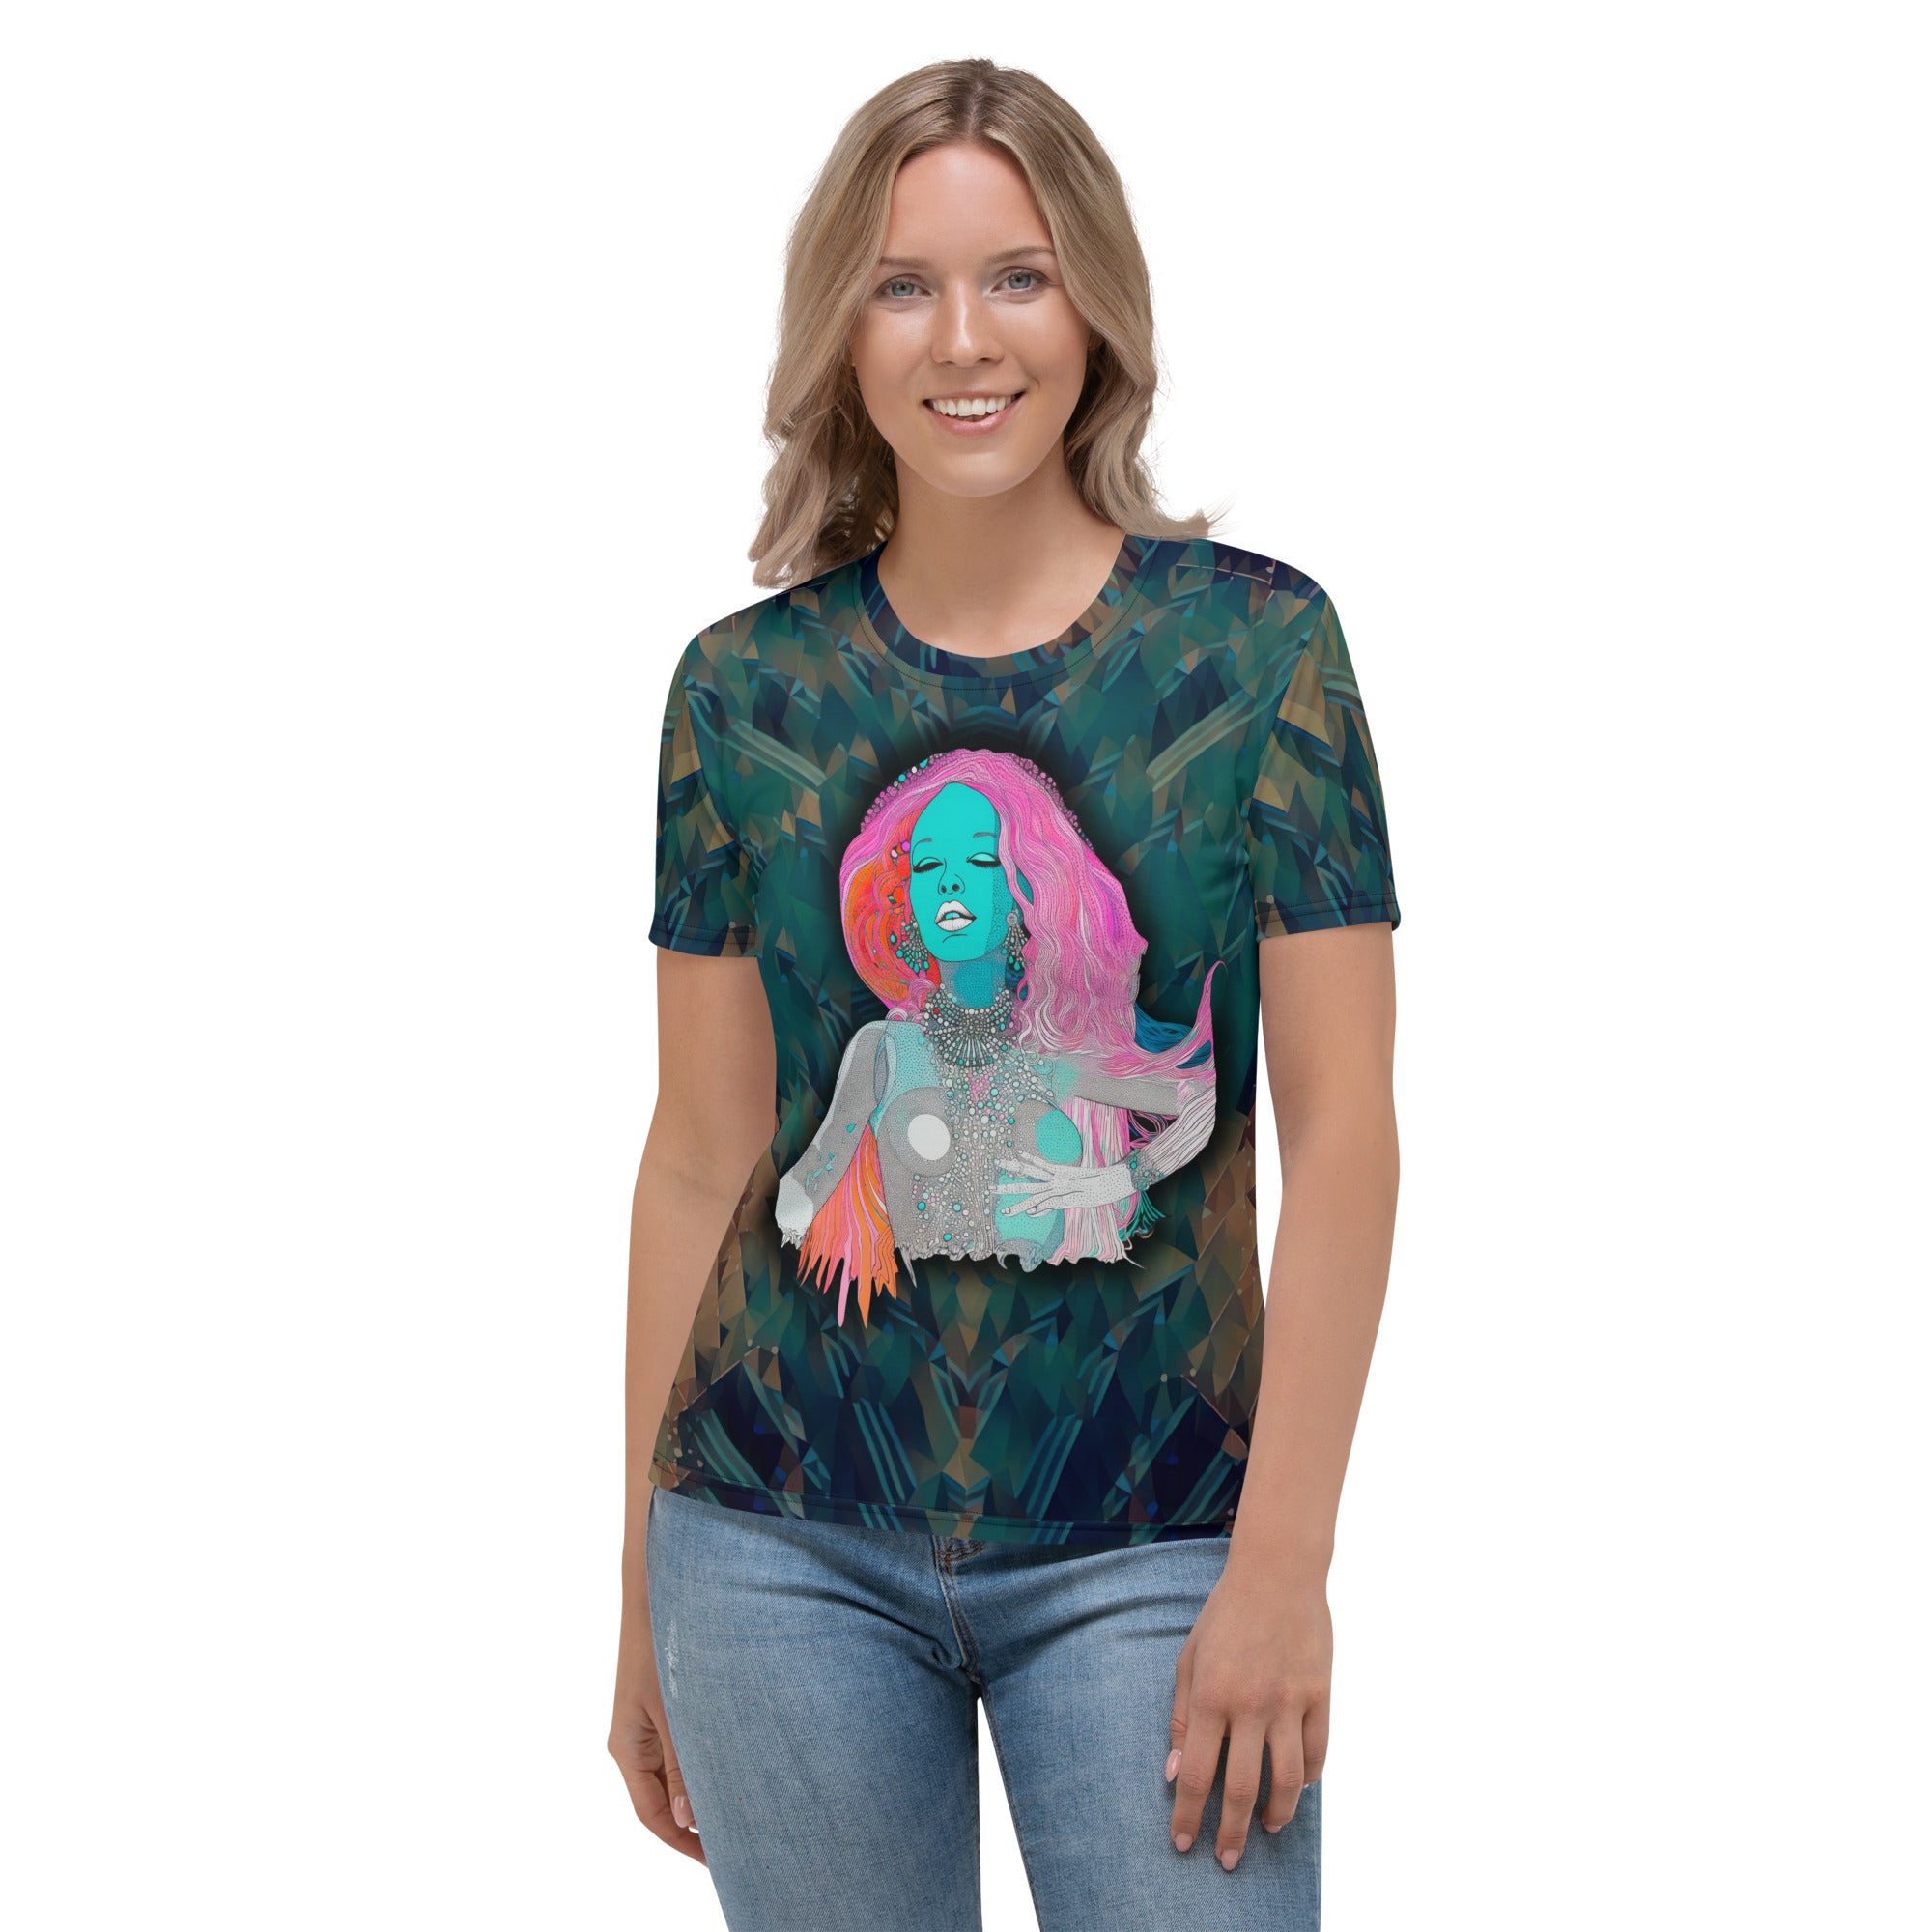 Model wearing Peaceful Petals Women's Crew Neck T-Shirt with jeans.